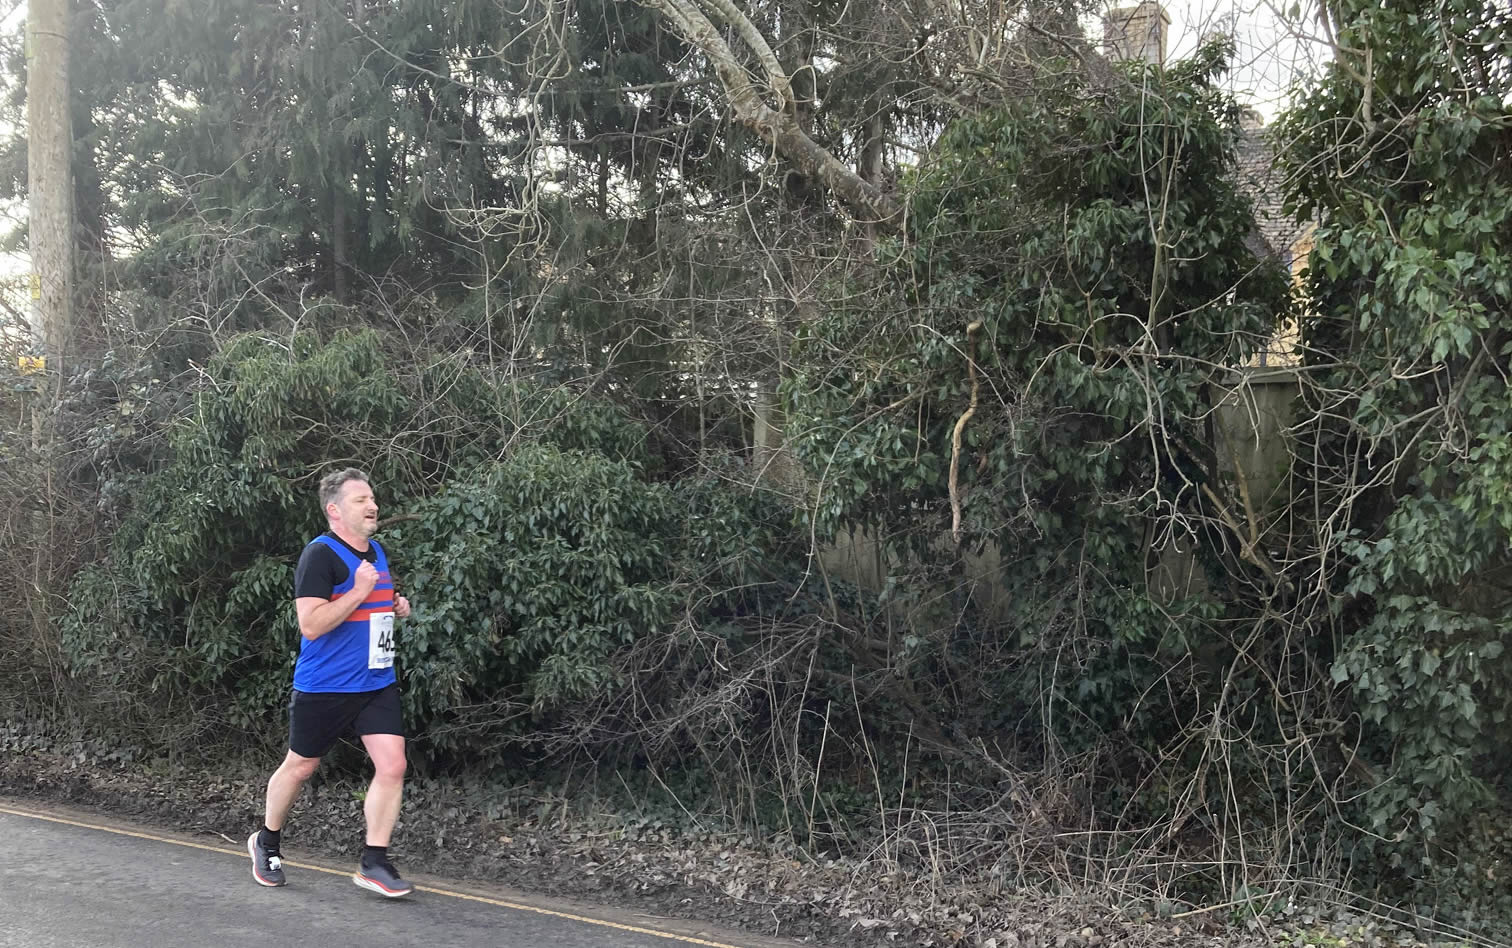 Bourton's Barry O'Leary at Highbridge Jewellers Bourton 10k Race - 26th February 2023